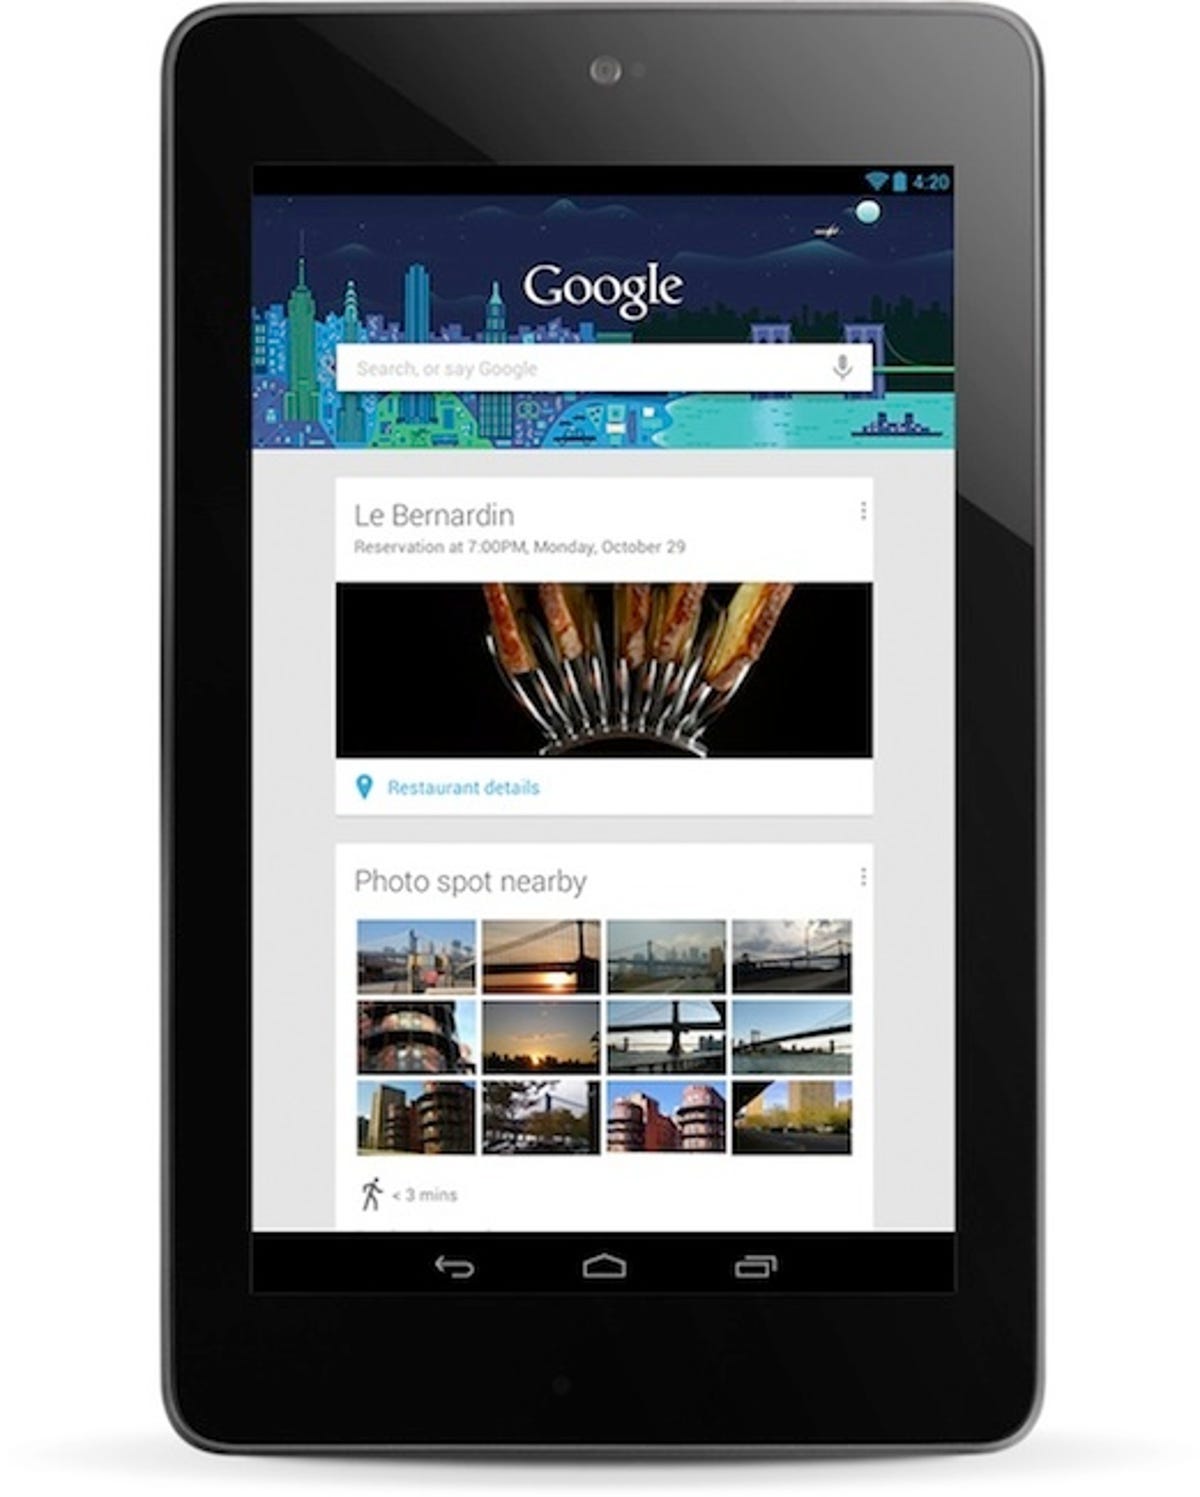 7-inch Nexus 7: Microsoft needs to address the market for 7- and 8-inch class tablets, according to IDC.